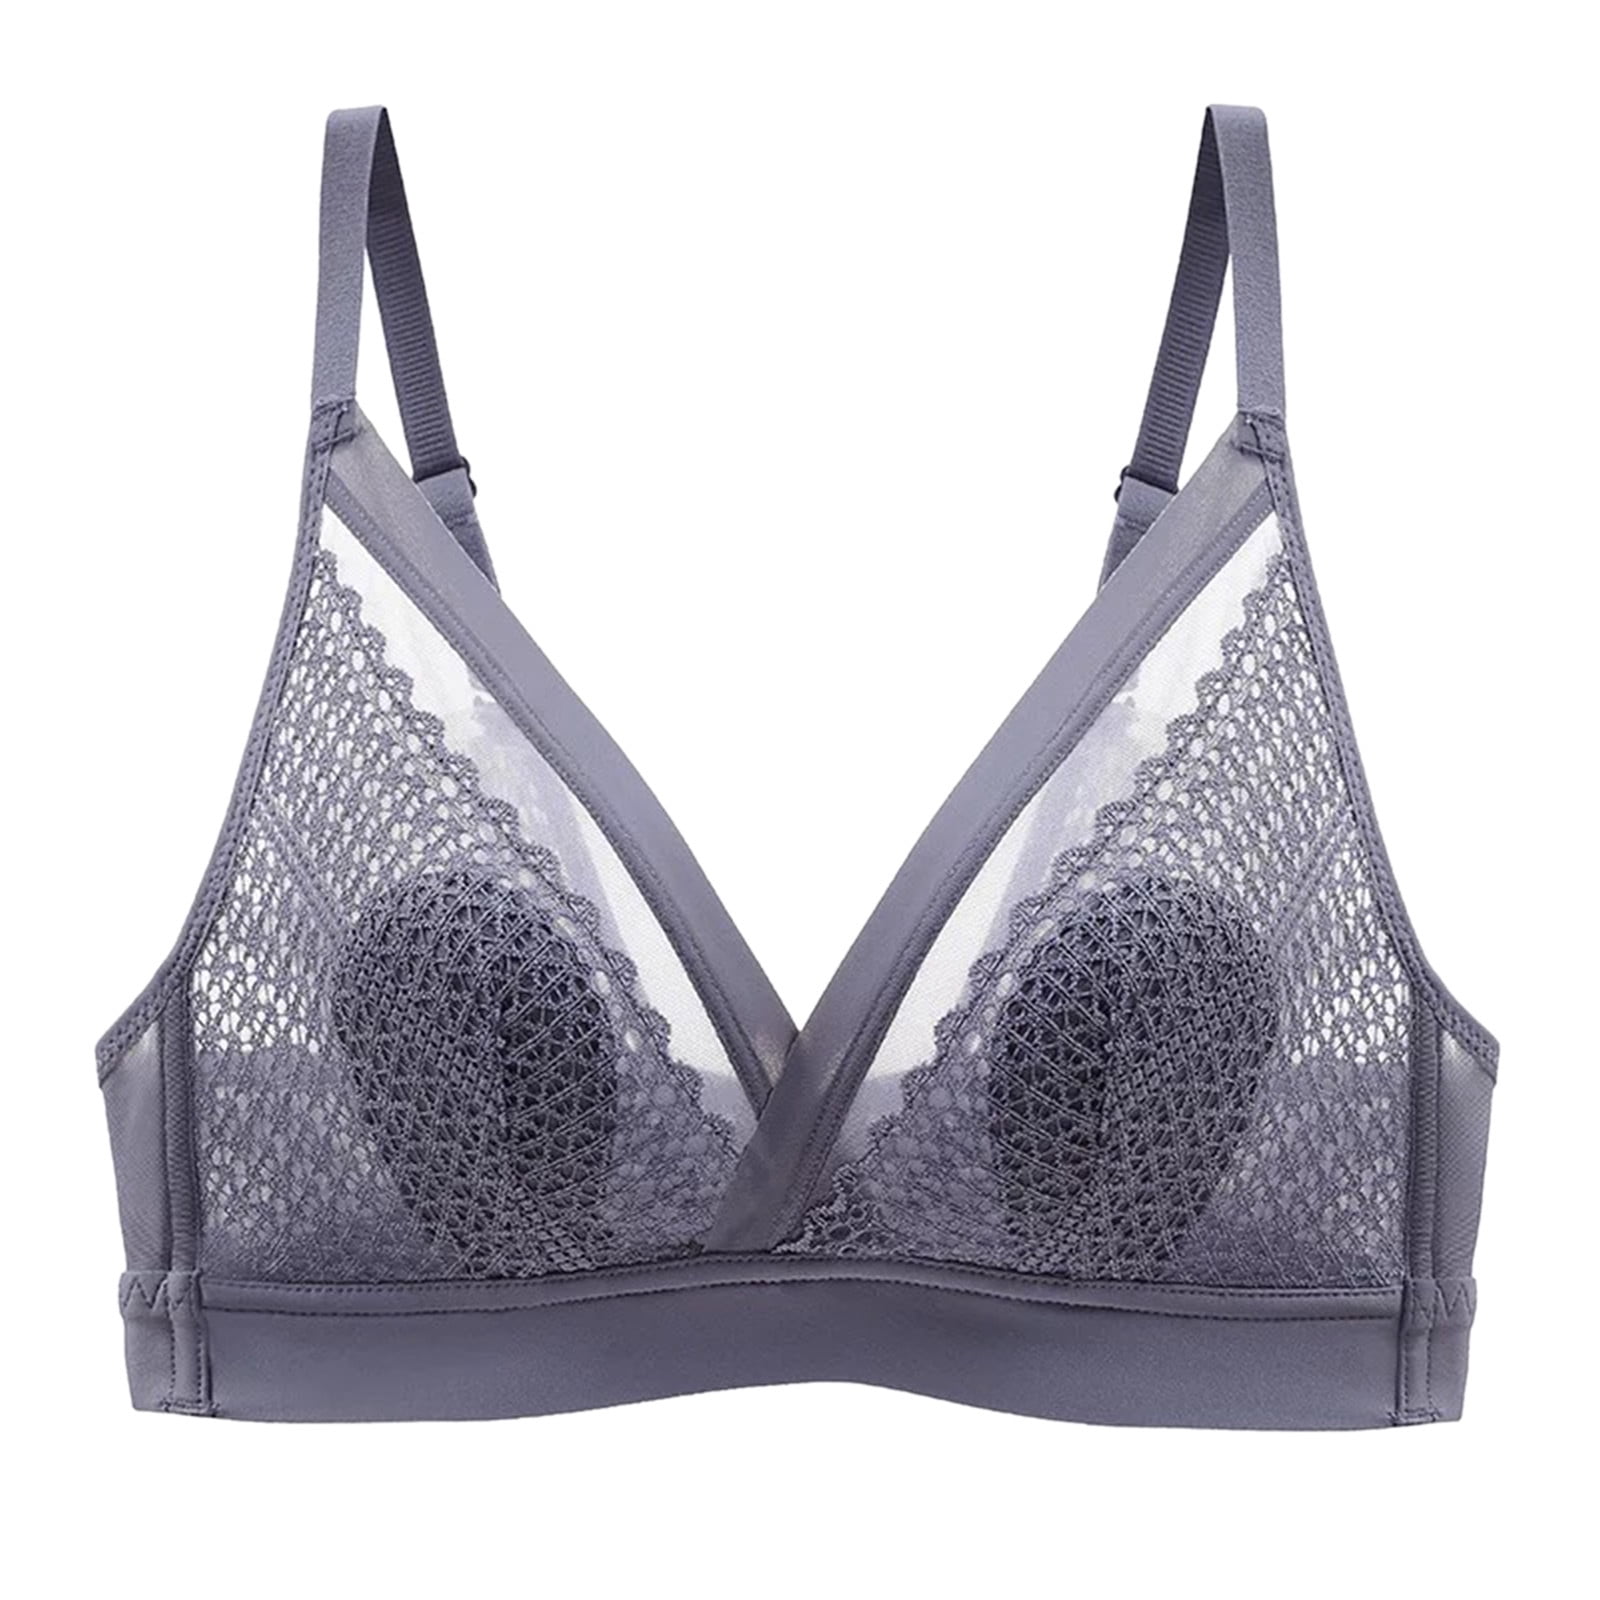 French Lace Triangle Cup Underwear Women's Big Show Small No Steel Ring Bra